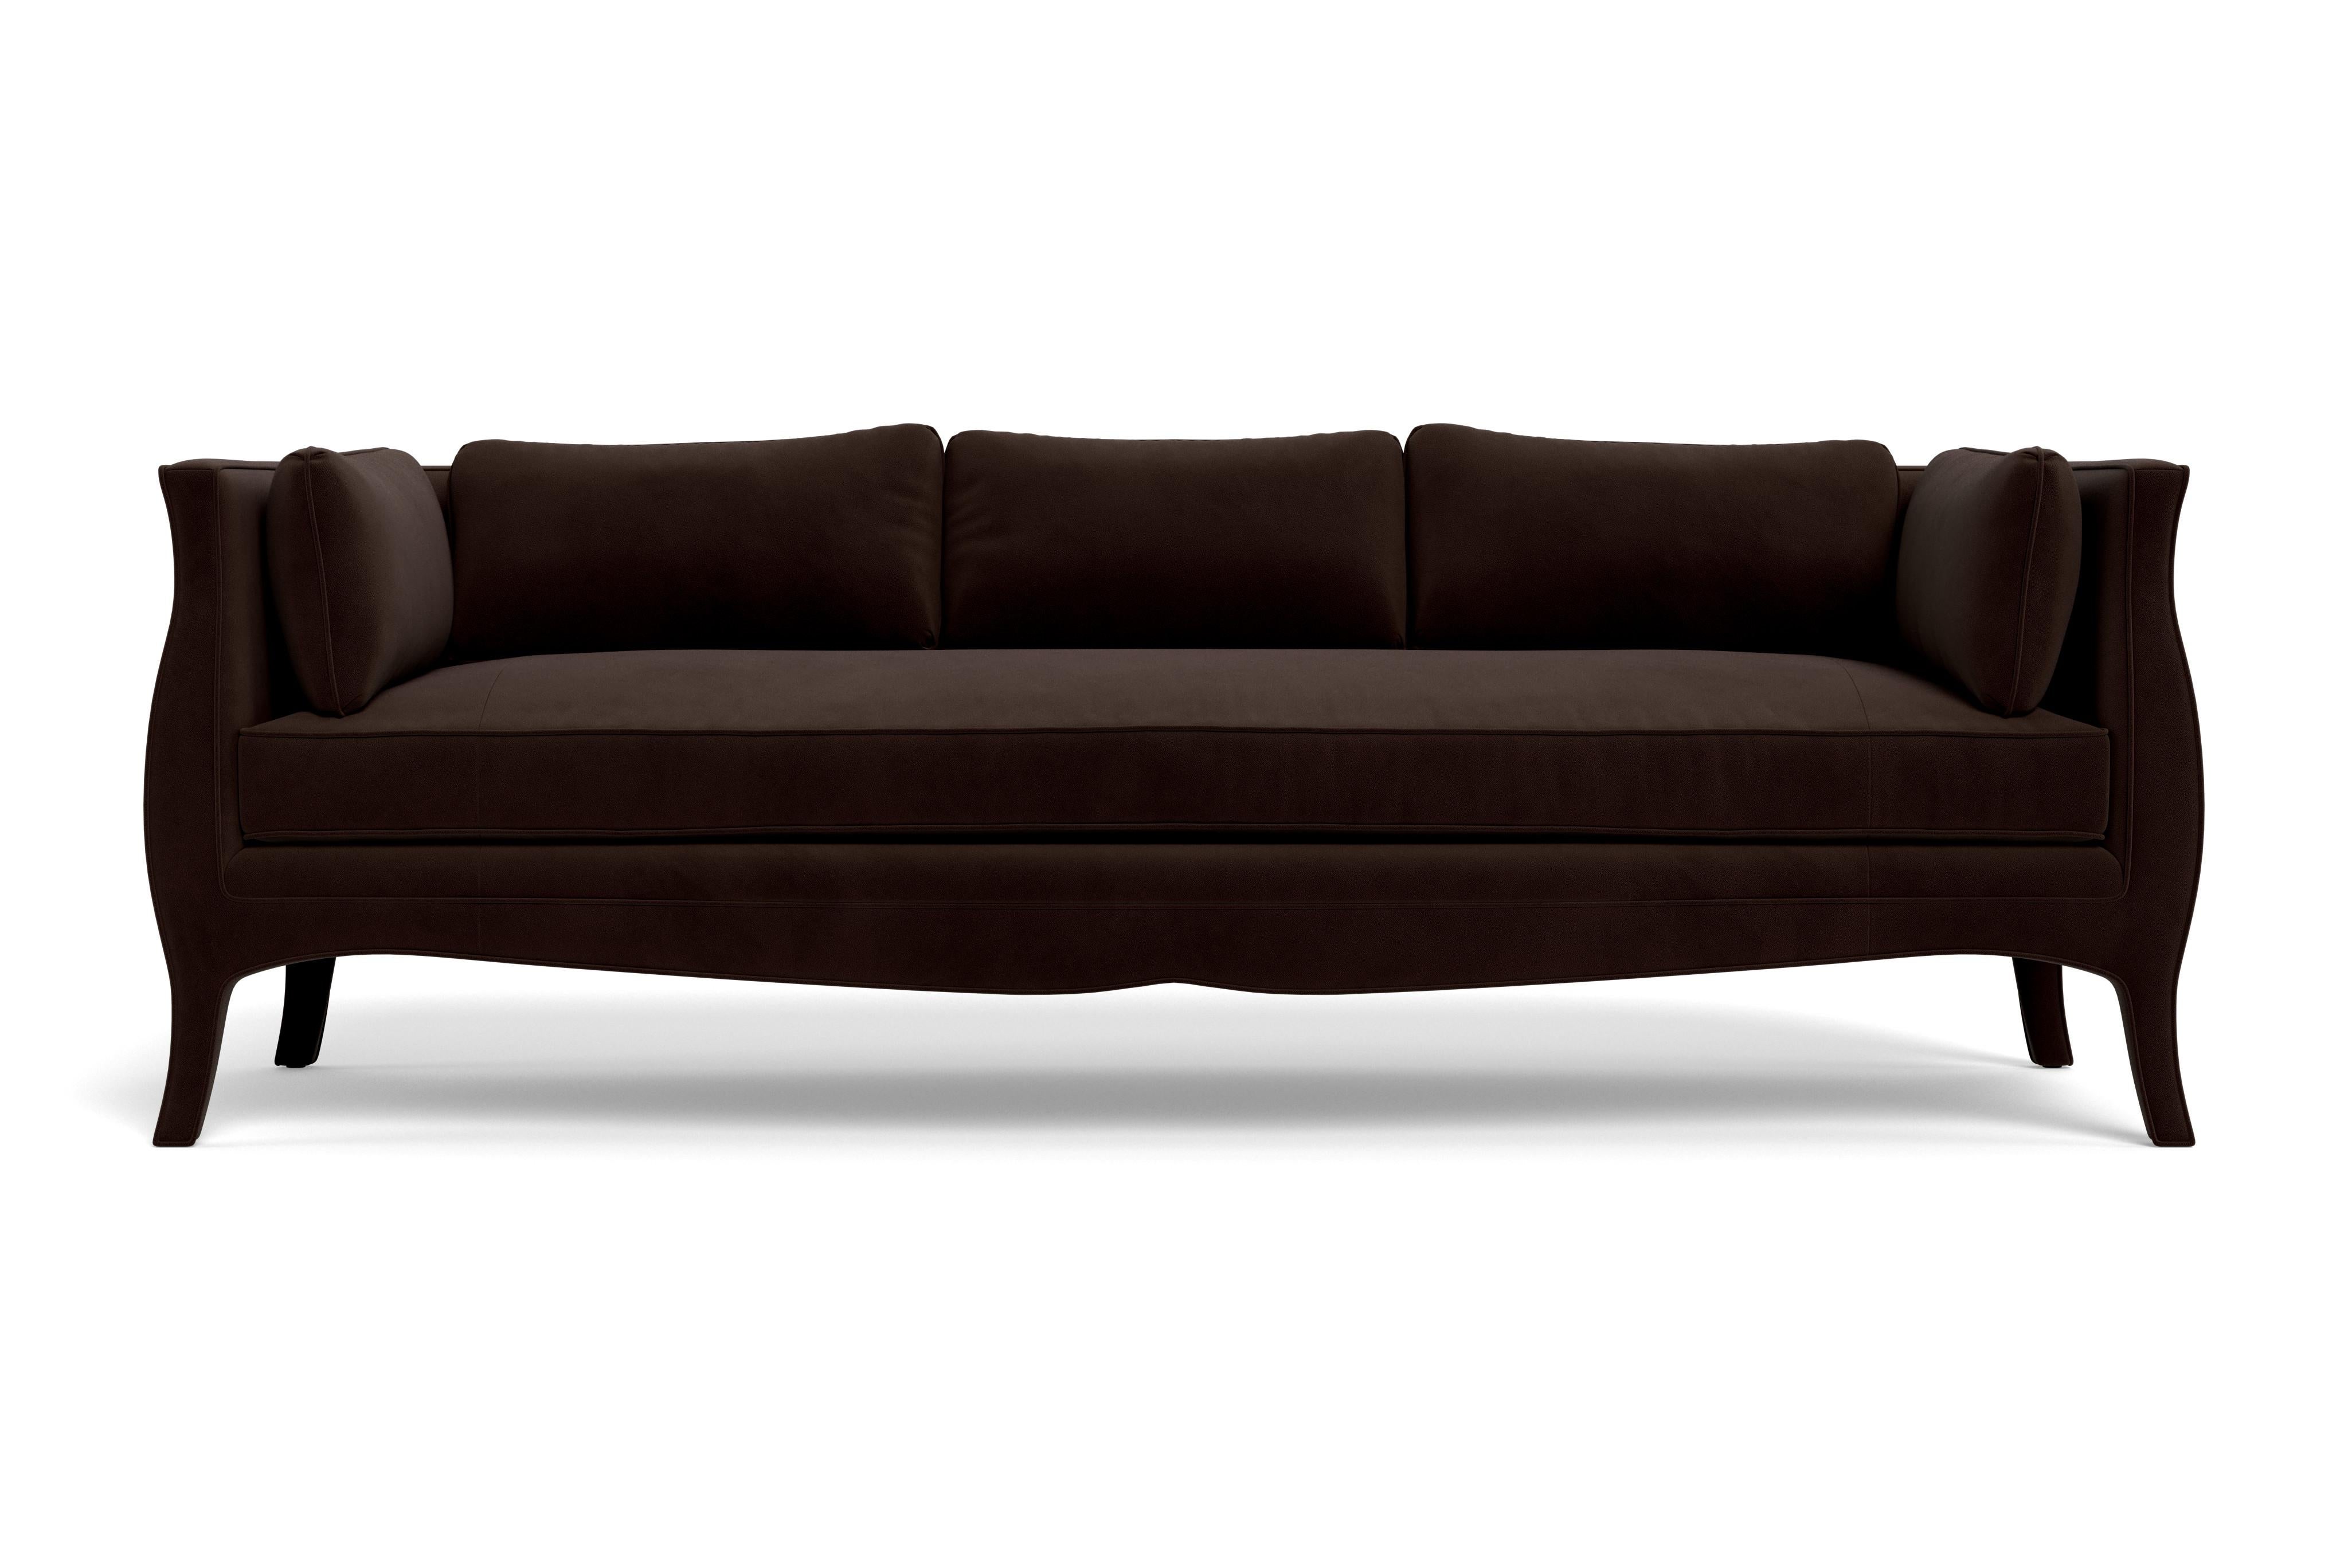 This piece, with its pretty lines and long, low form, is so tempting to sink into and when you do you’ll appreciate the irresistible softness, deep plush seat and perfectly sized plump cushions that envelop you. Ideal entertaining an intimate crowd,